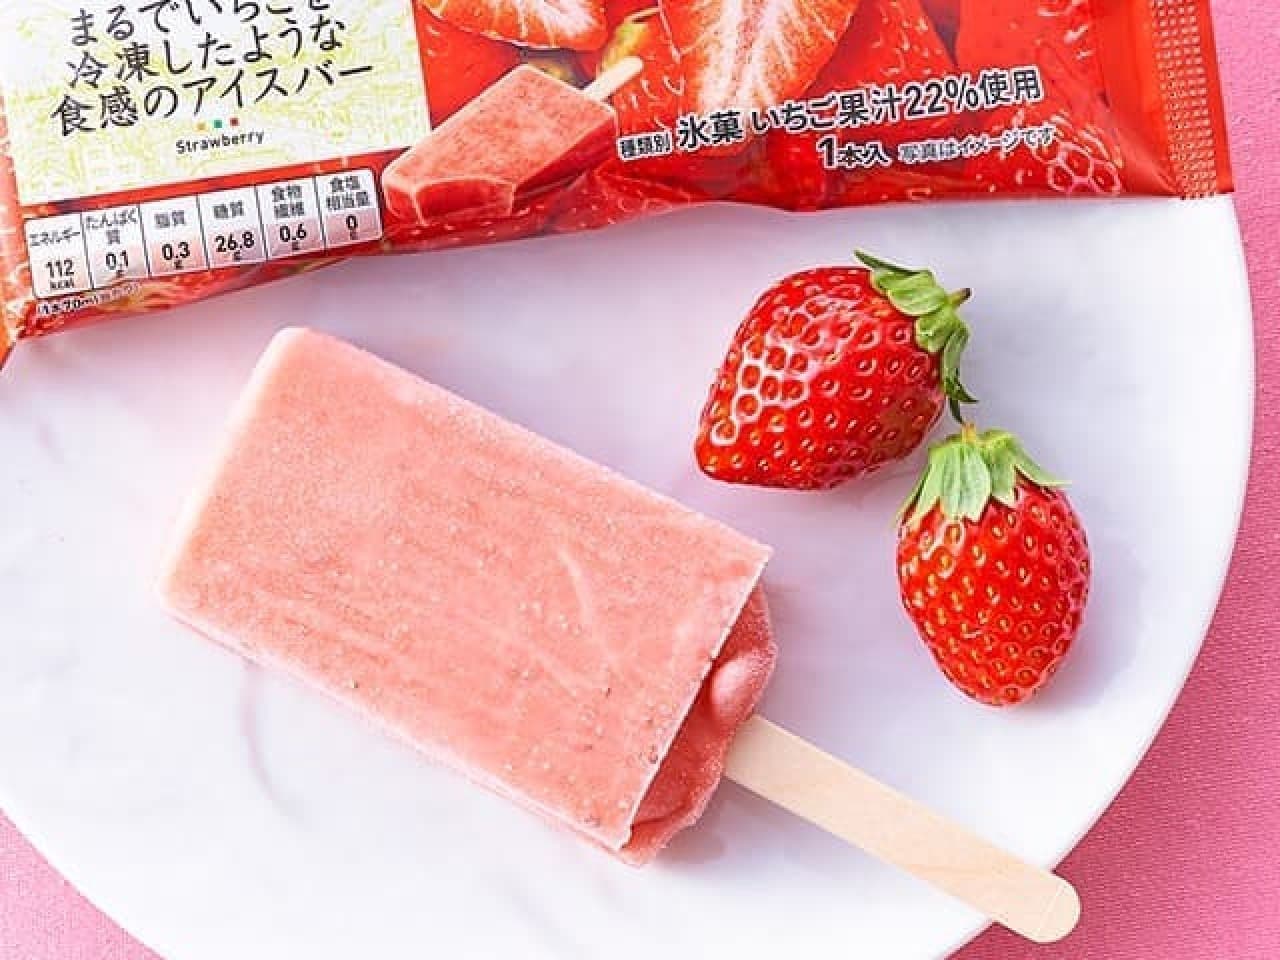 7-ELEVEN "It's like a strawberry ice bar"